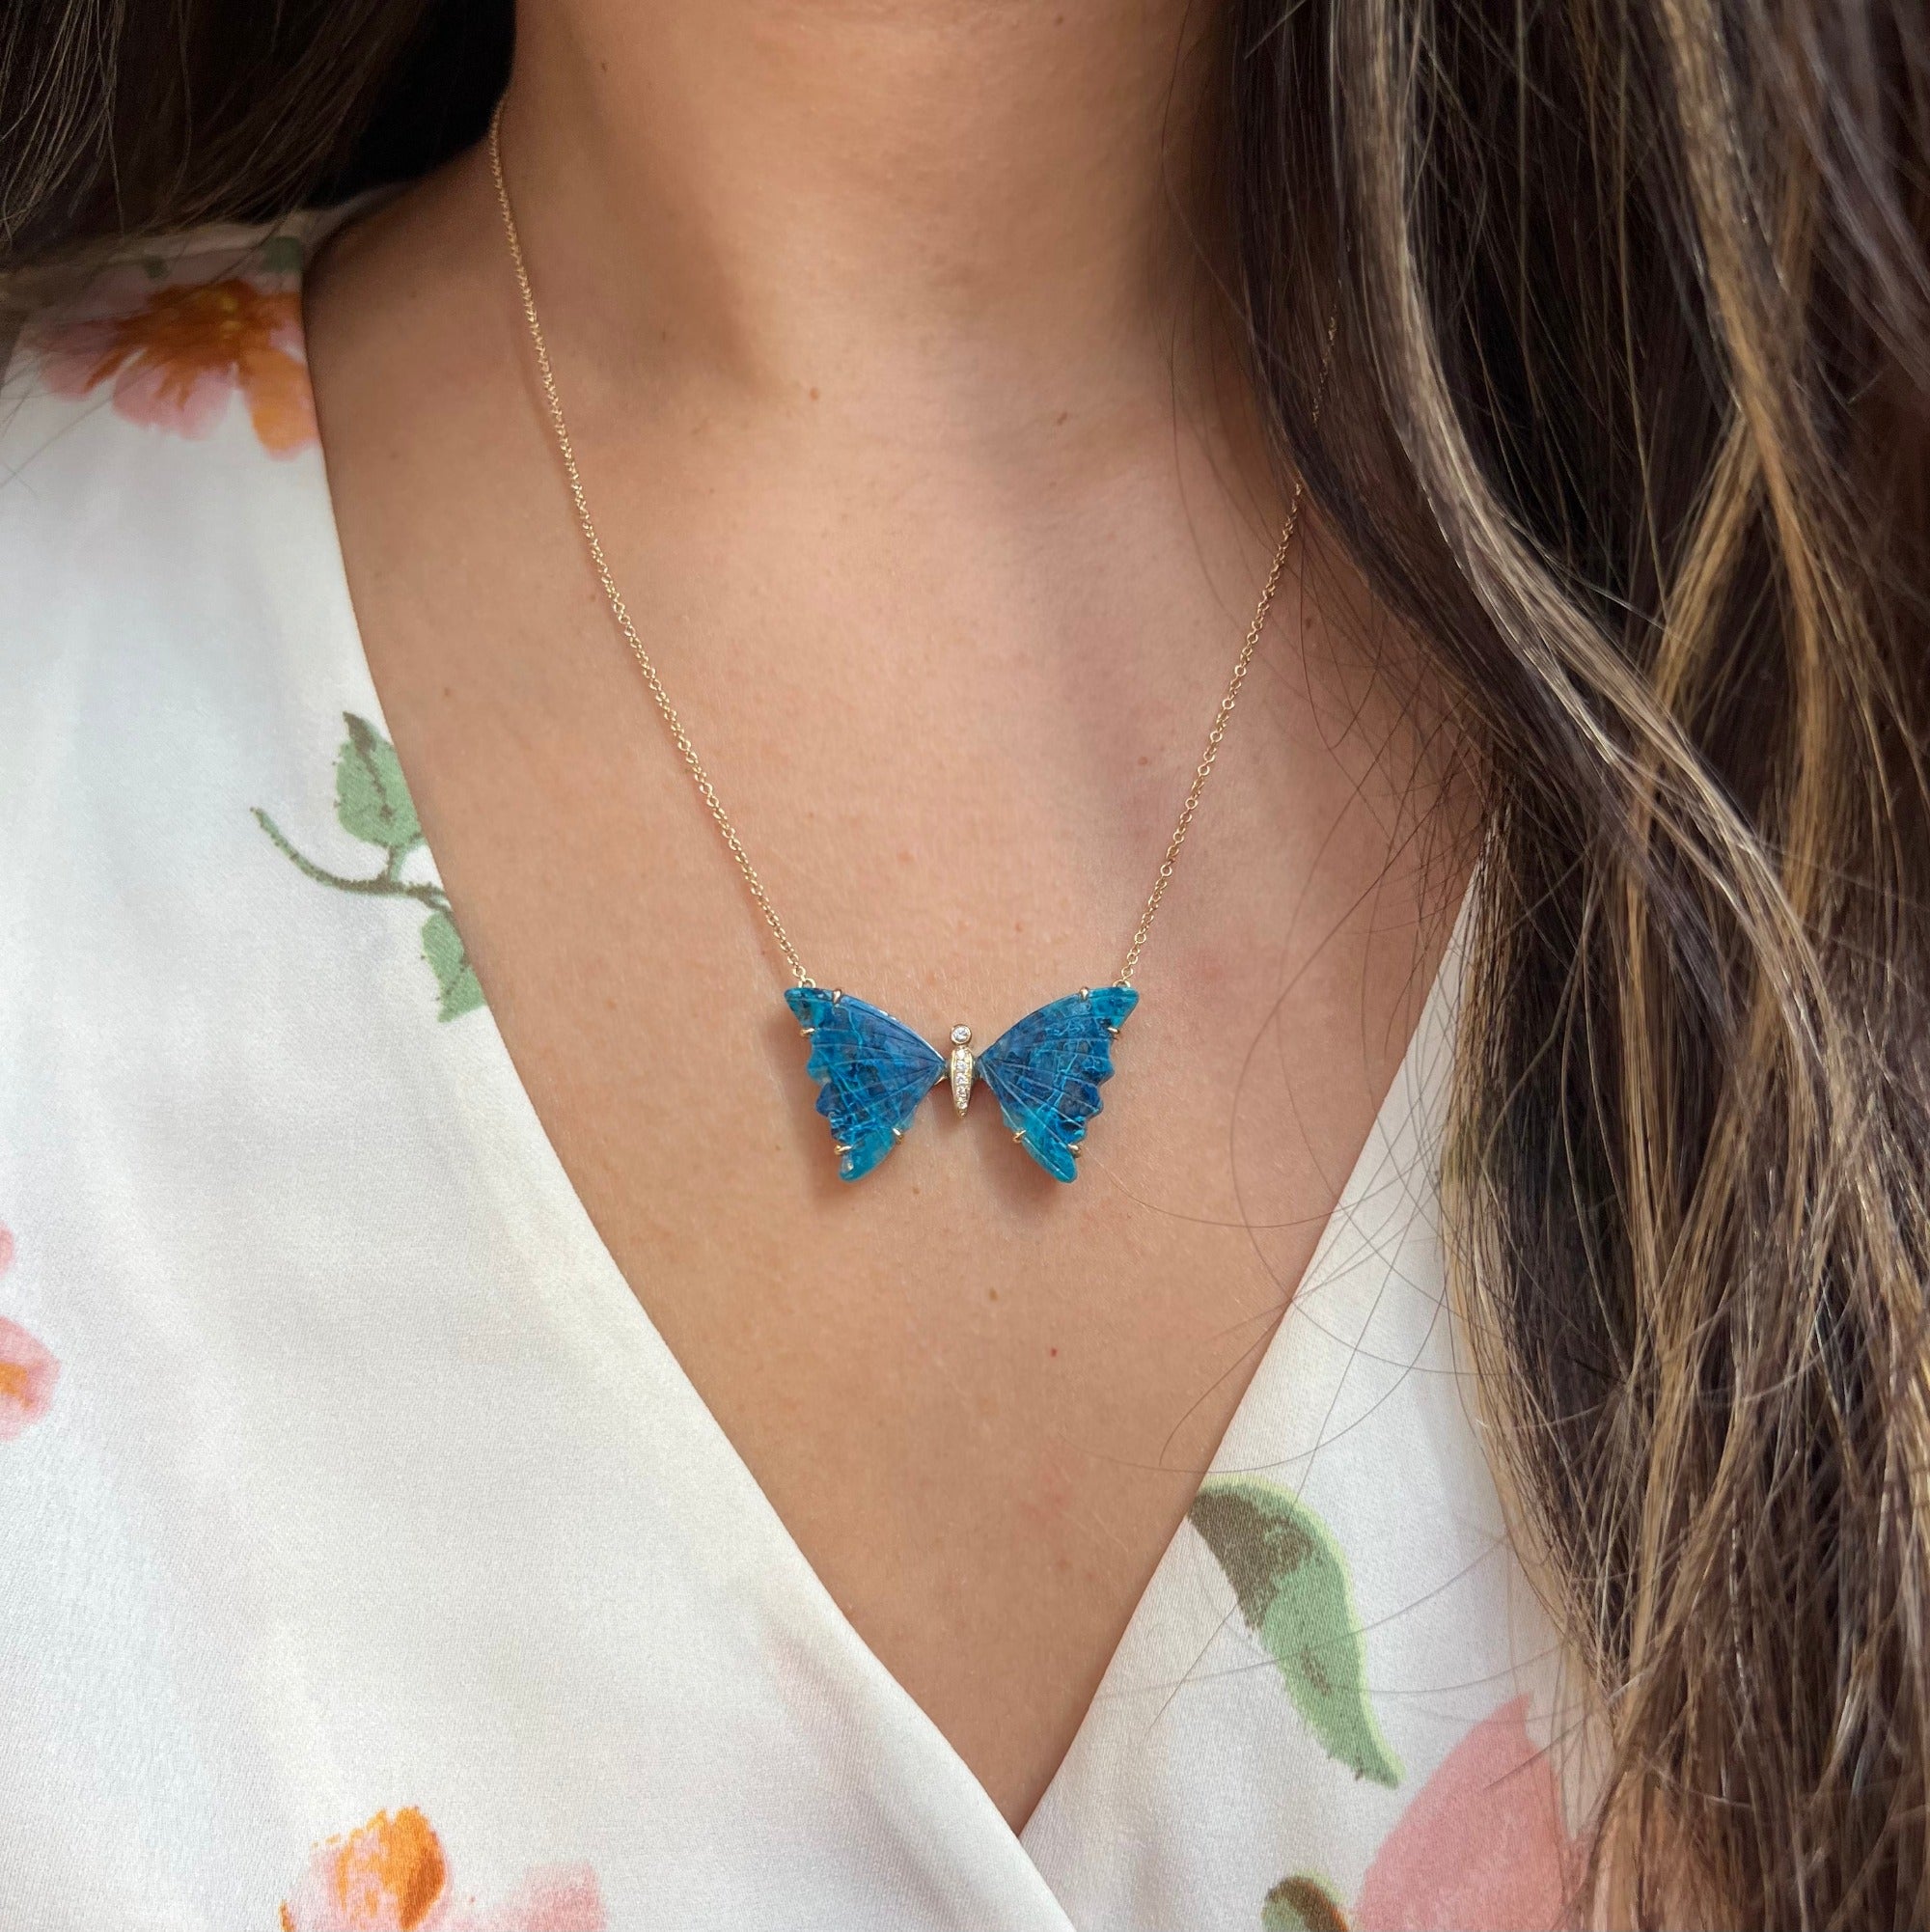 large chrysocolla butterfly necklace with prongs and diamonds